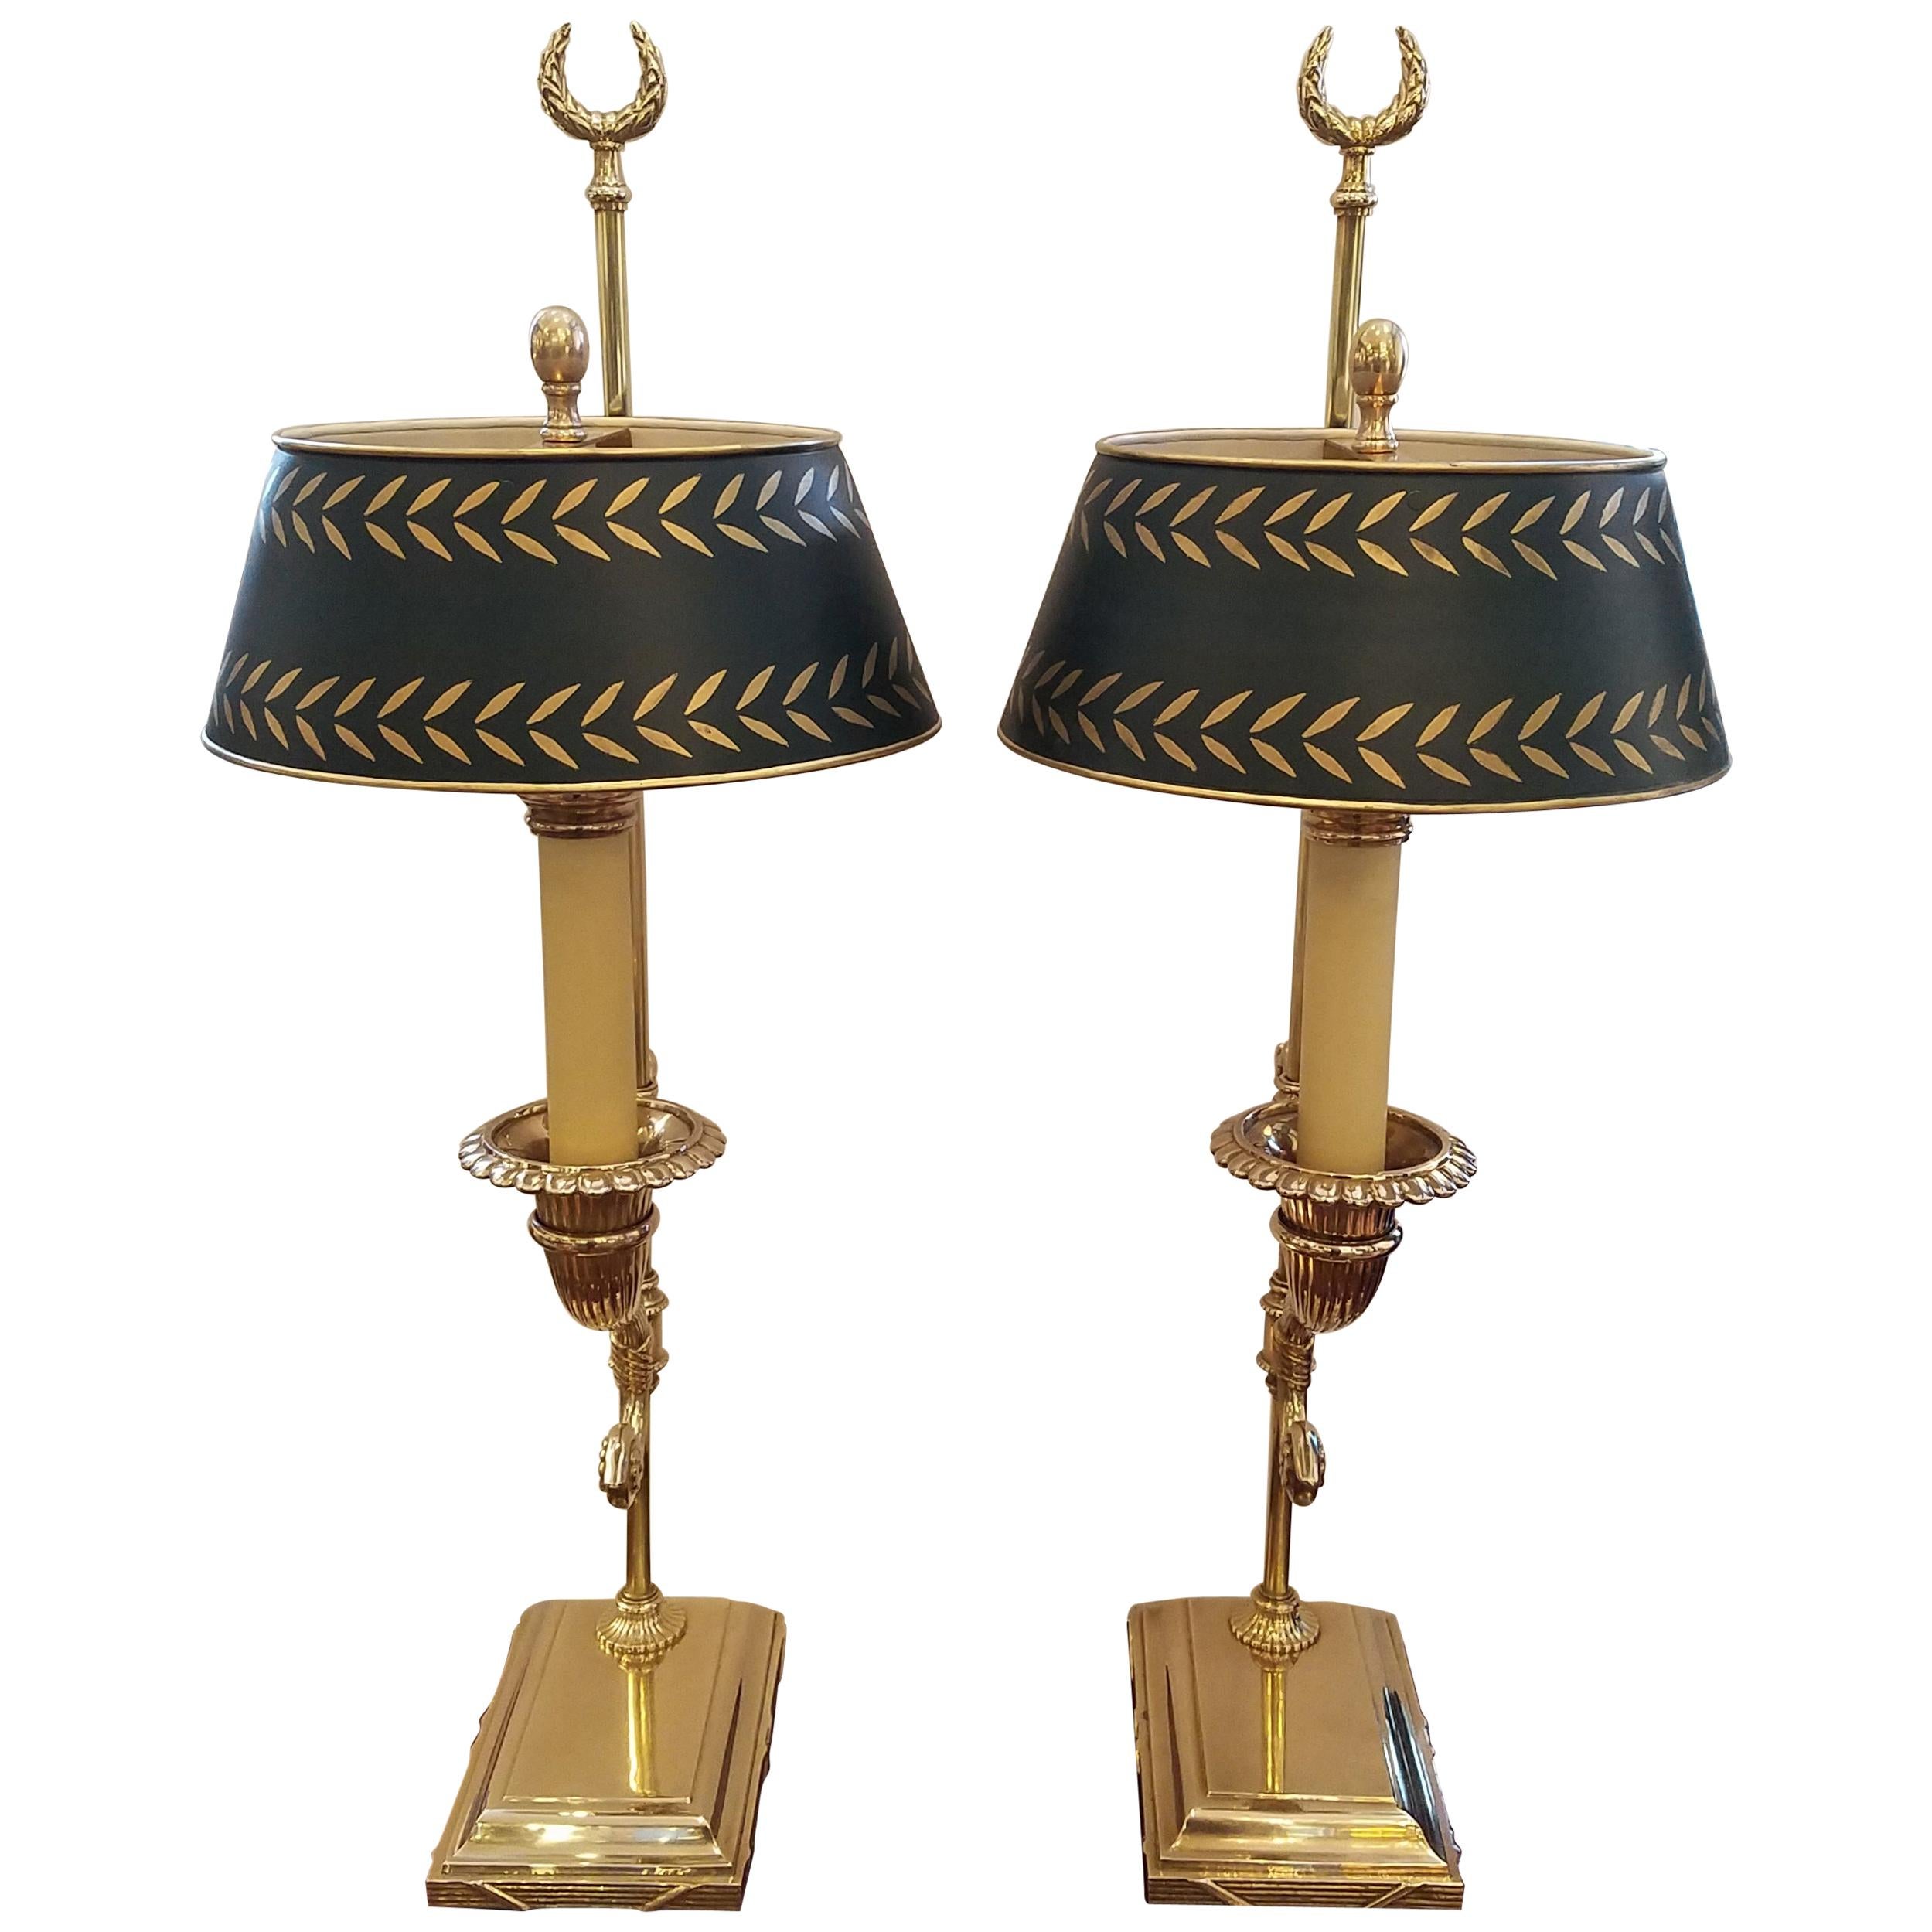 Pair of Cast Brass and Tole Cornicopia Lamps by Chapaman